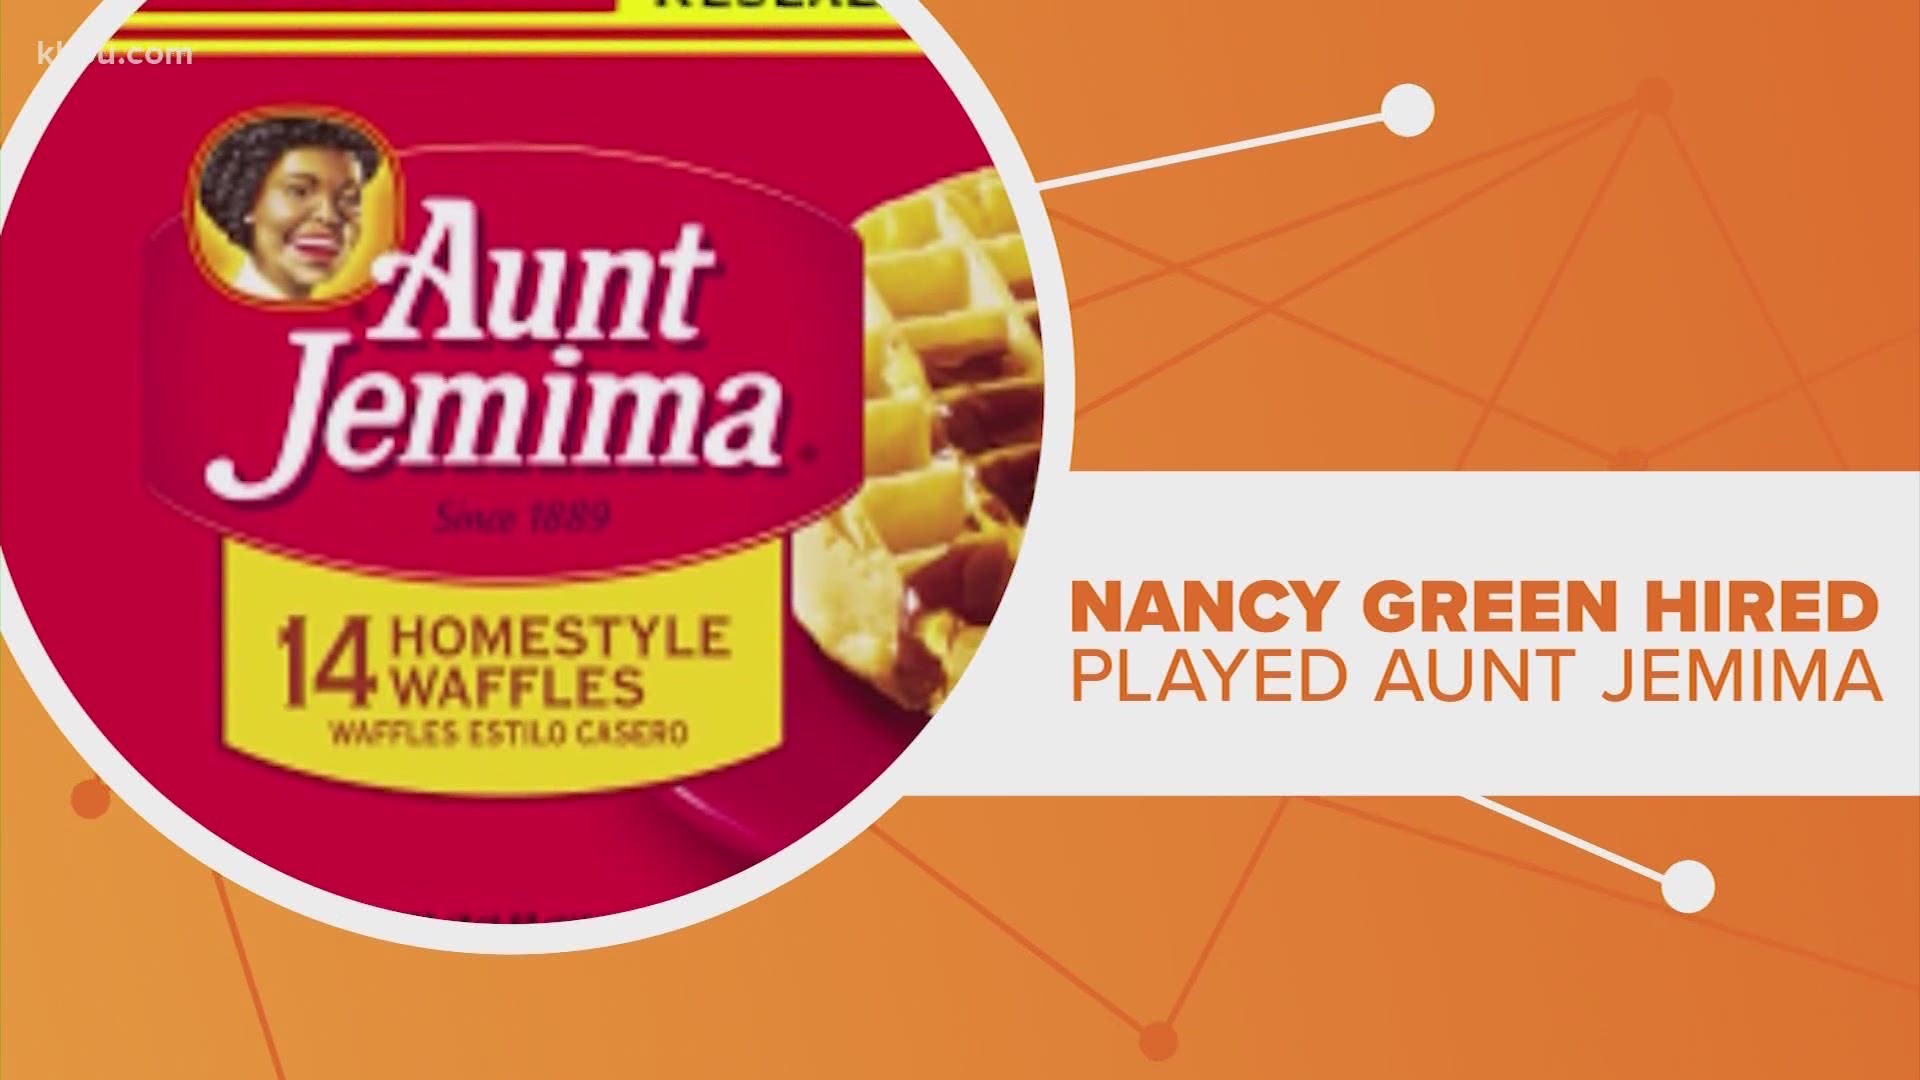 After years of complaints, Quaker Oats has announced it is retiring the Aunt Jemima brand. The brand has been mired in racist stereotypes from the beginning.